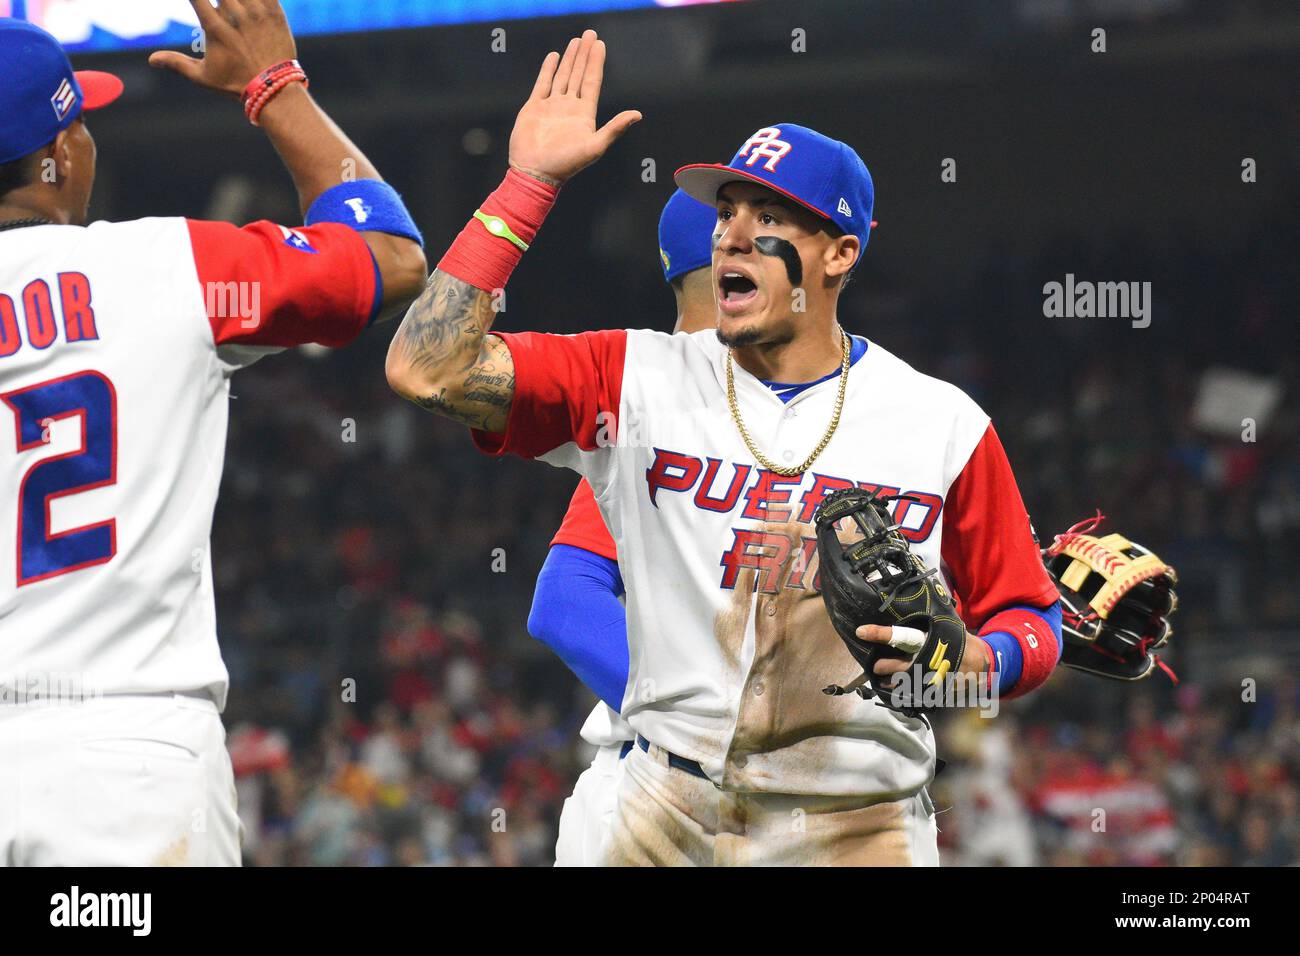 SAN DIEGO, CA - MARCH 17: Puerto Rico Second baseman Javier Baez gets high  fives after their 6-5 win over the USA in World Baseball Classic second  round Pool F game against